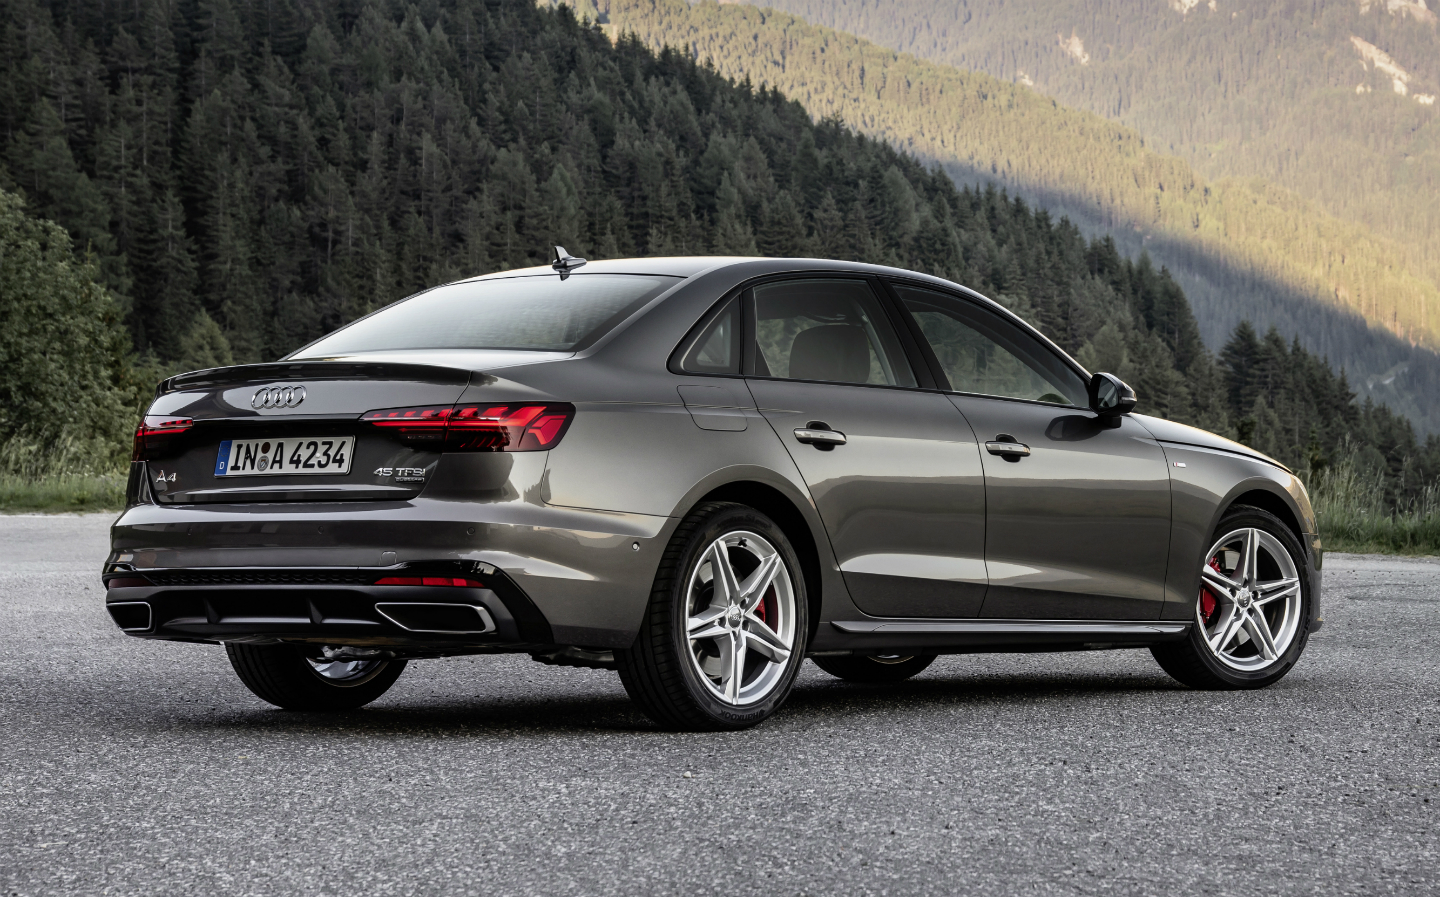 2019-Audi-A4-Saloon-First-Drive-Review-12.jpg